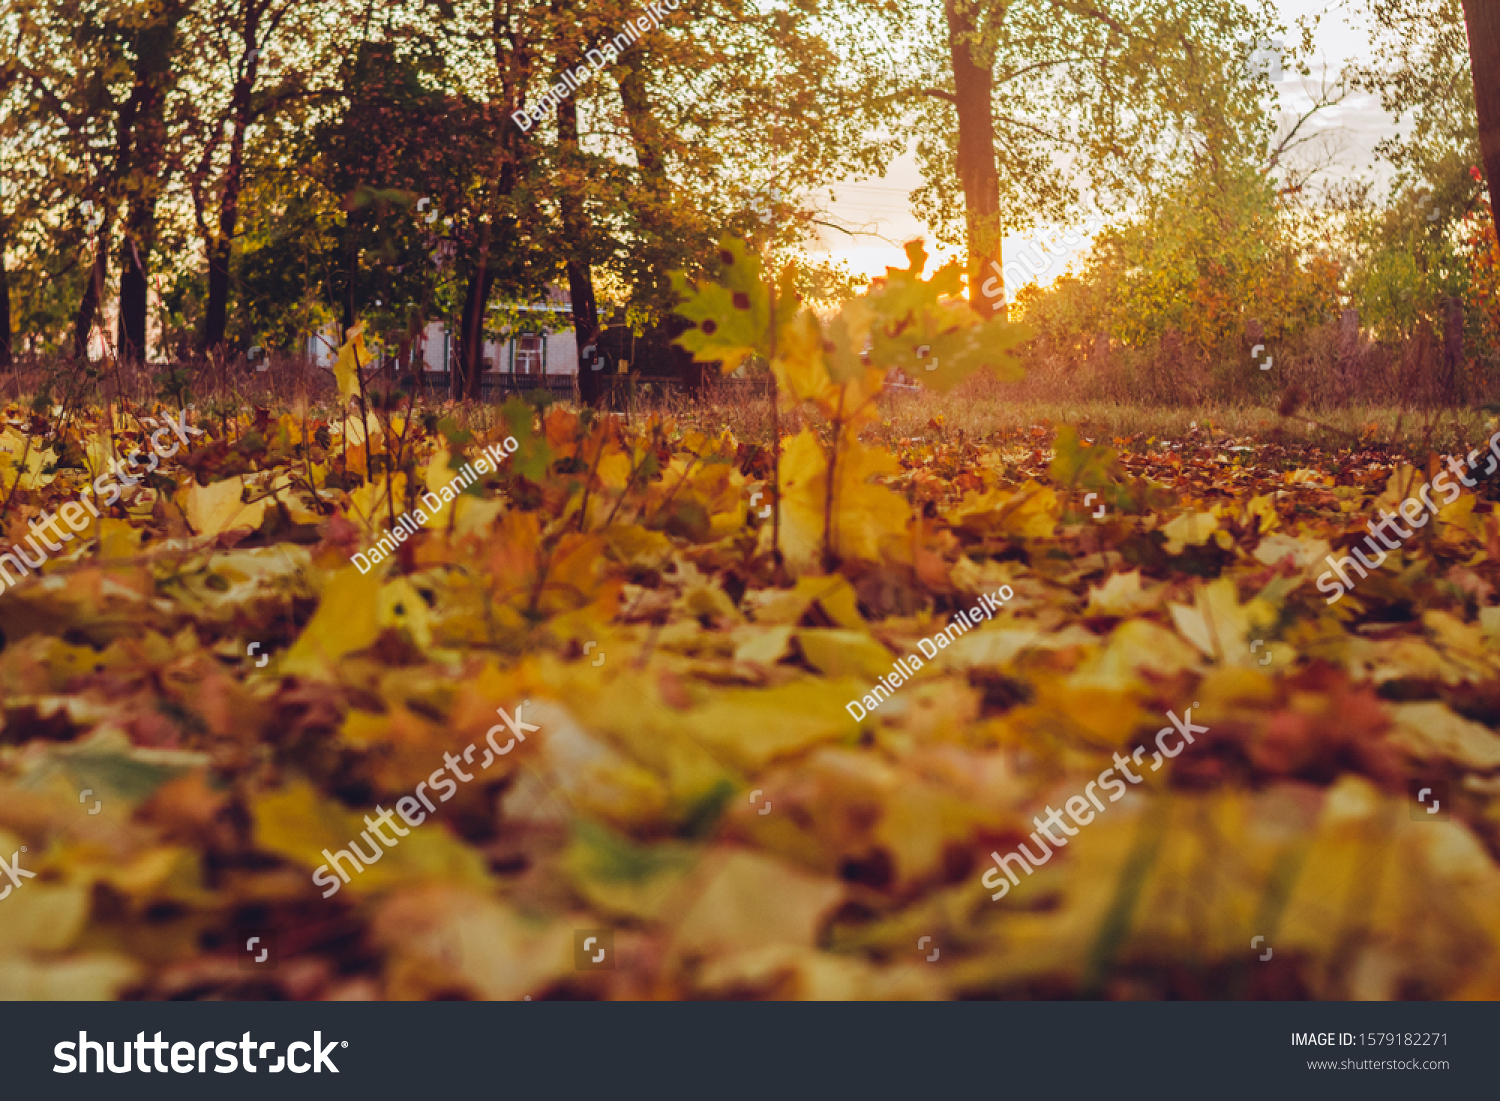 Autumn Tree and Sun during Sunset. Golden sunset in bokeh background. Golden autumn leaf illuminated by a low bright autumnal sun from behind, amongst other red and brown fall leaves on the ground #1579182271